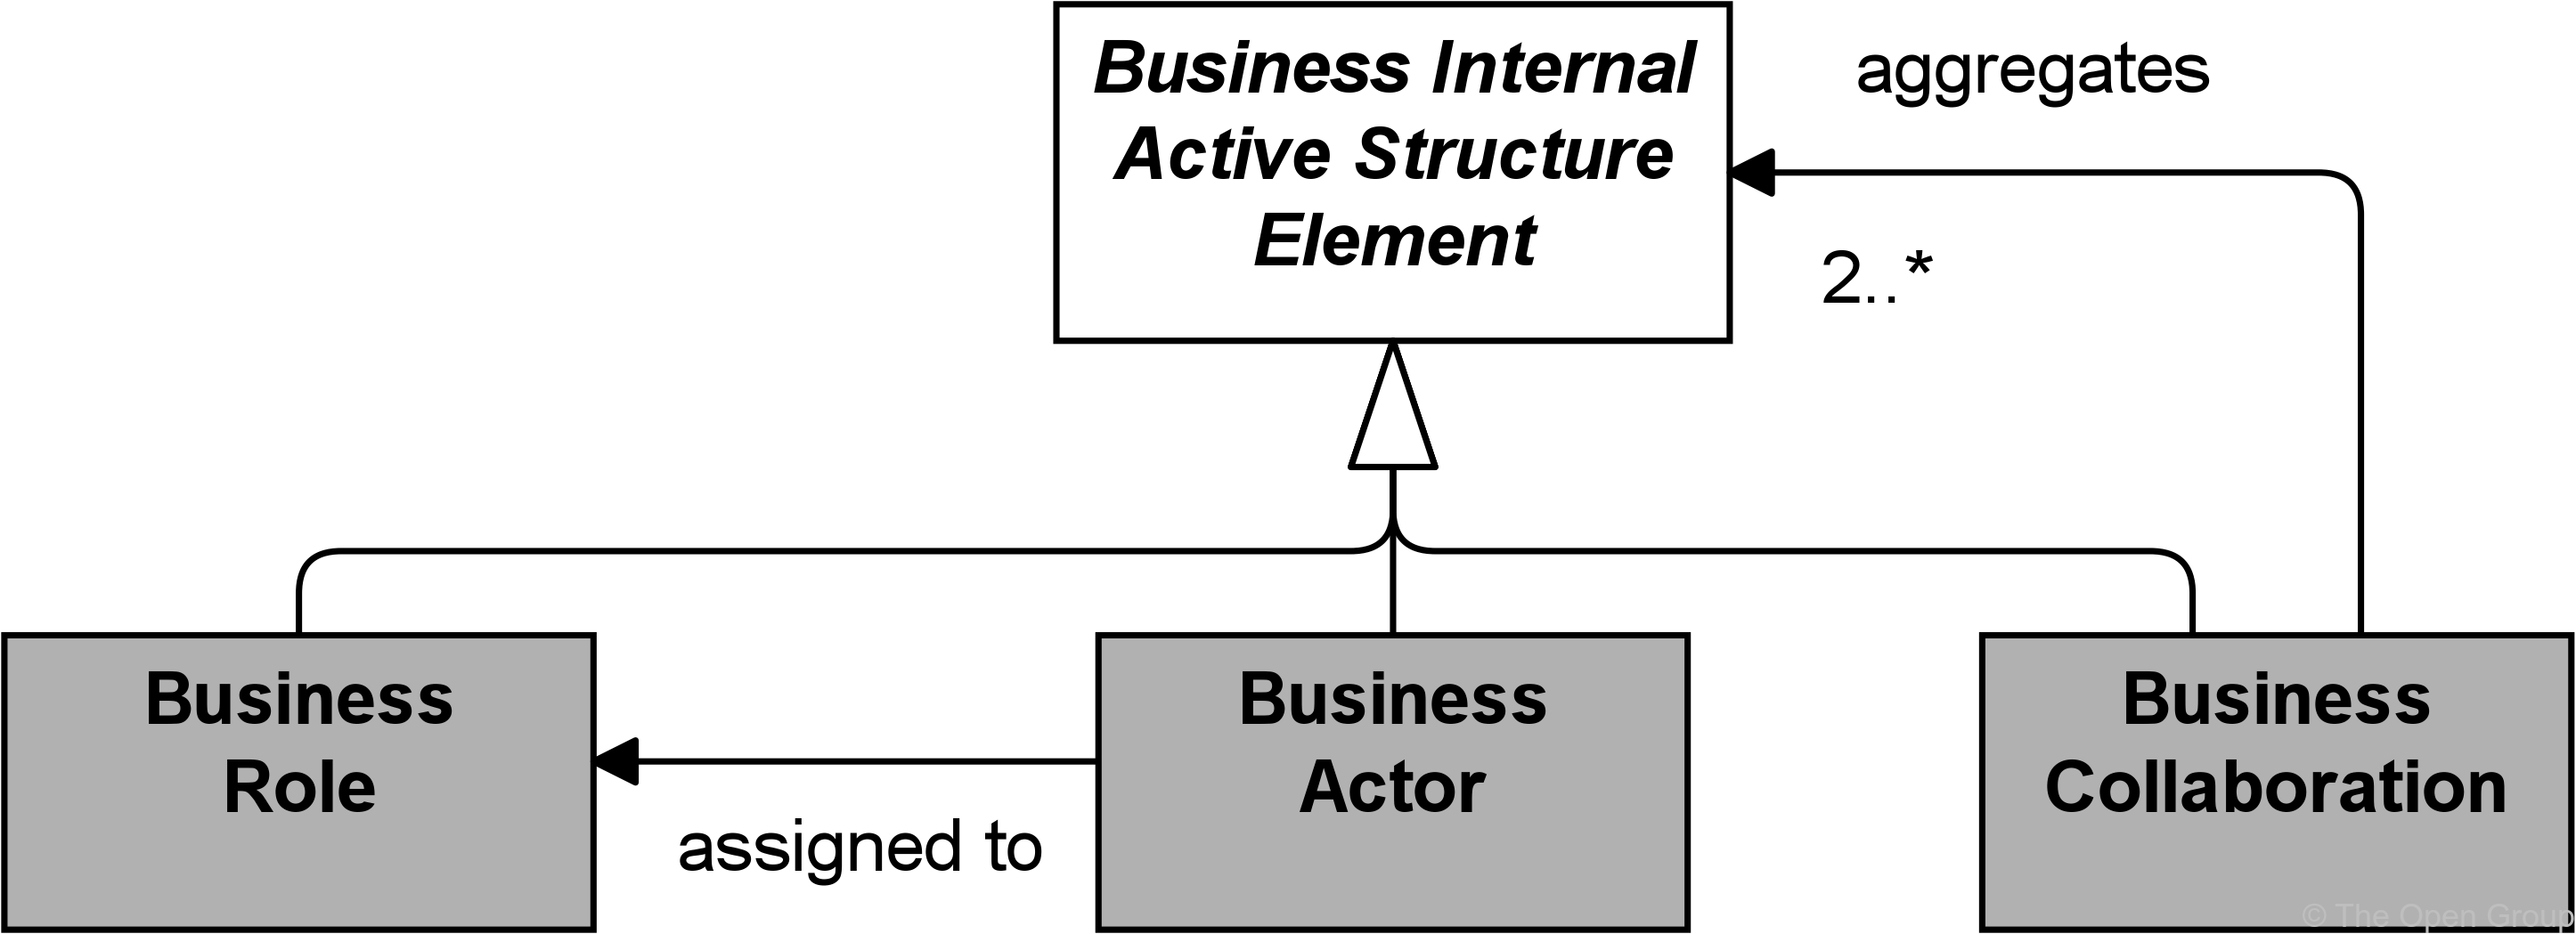 fig Business Internal Active Structure Elements